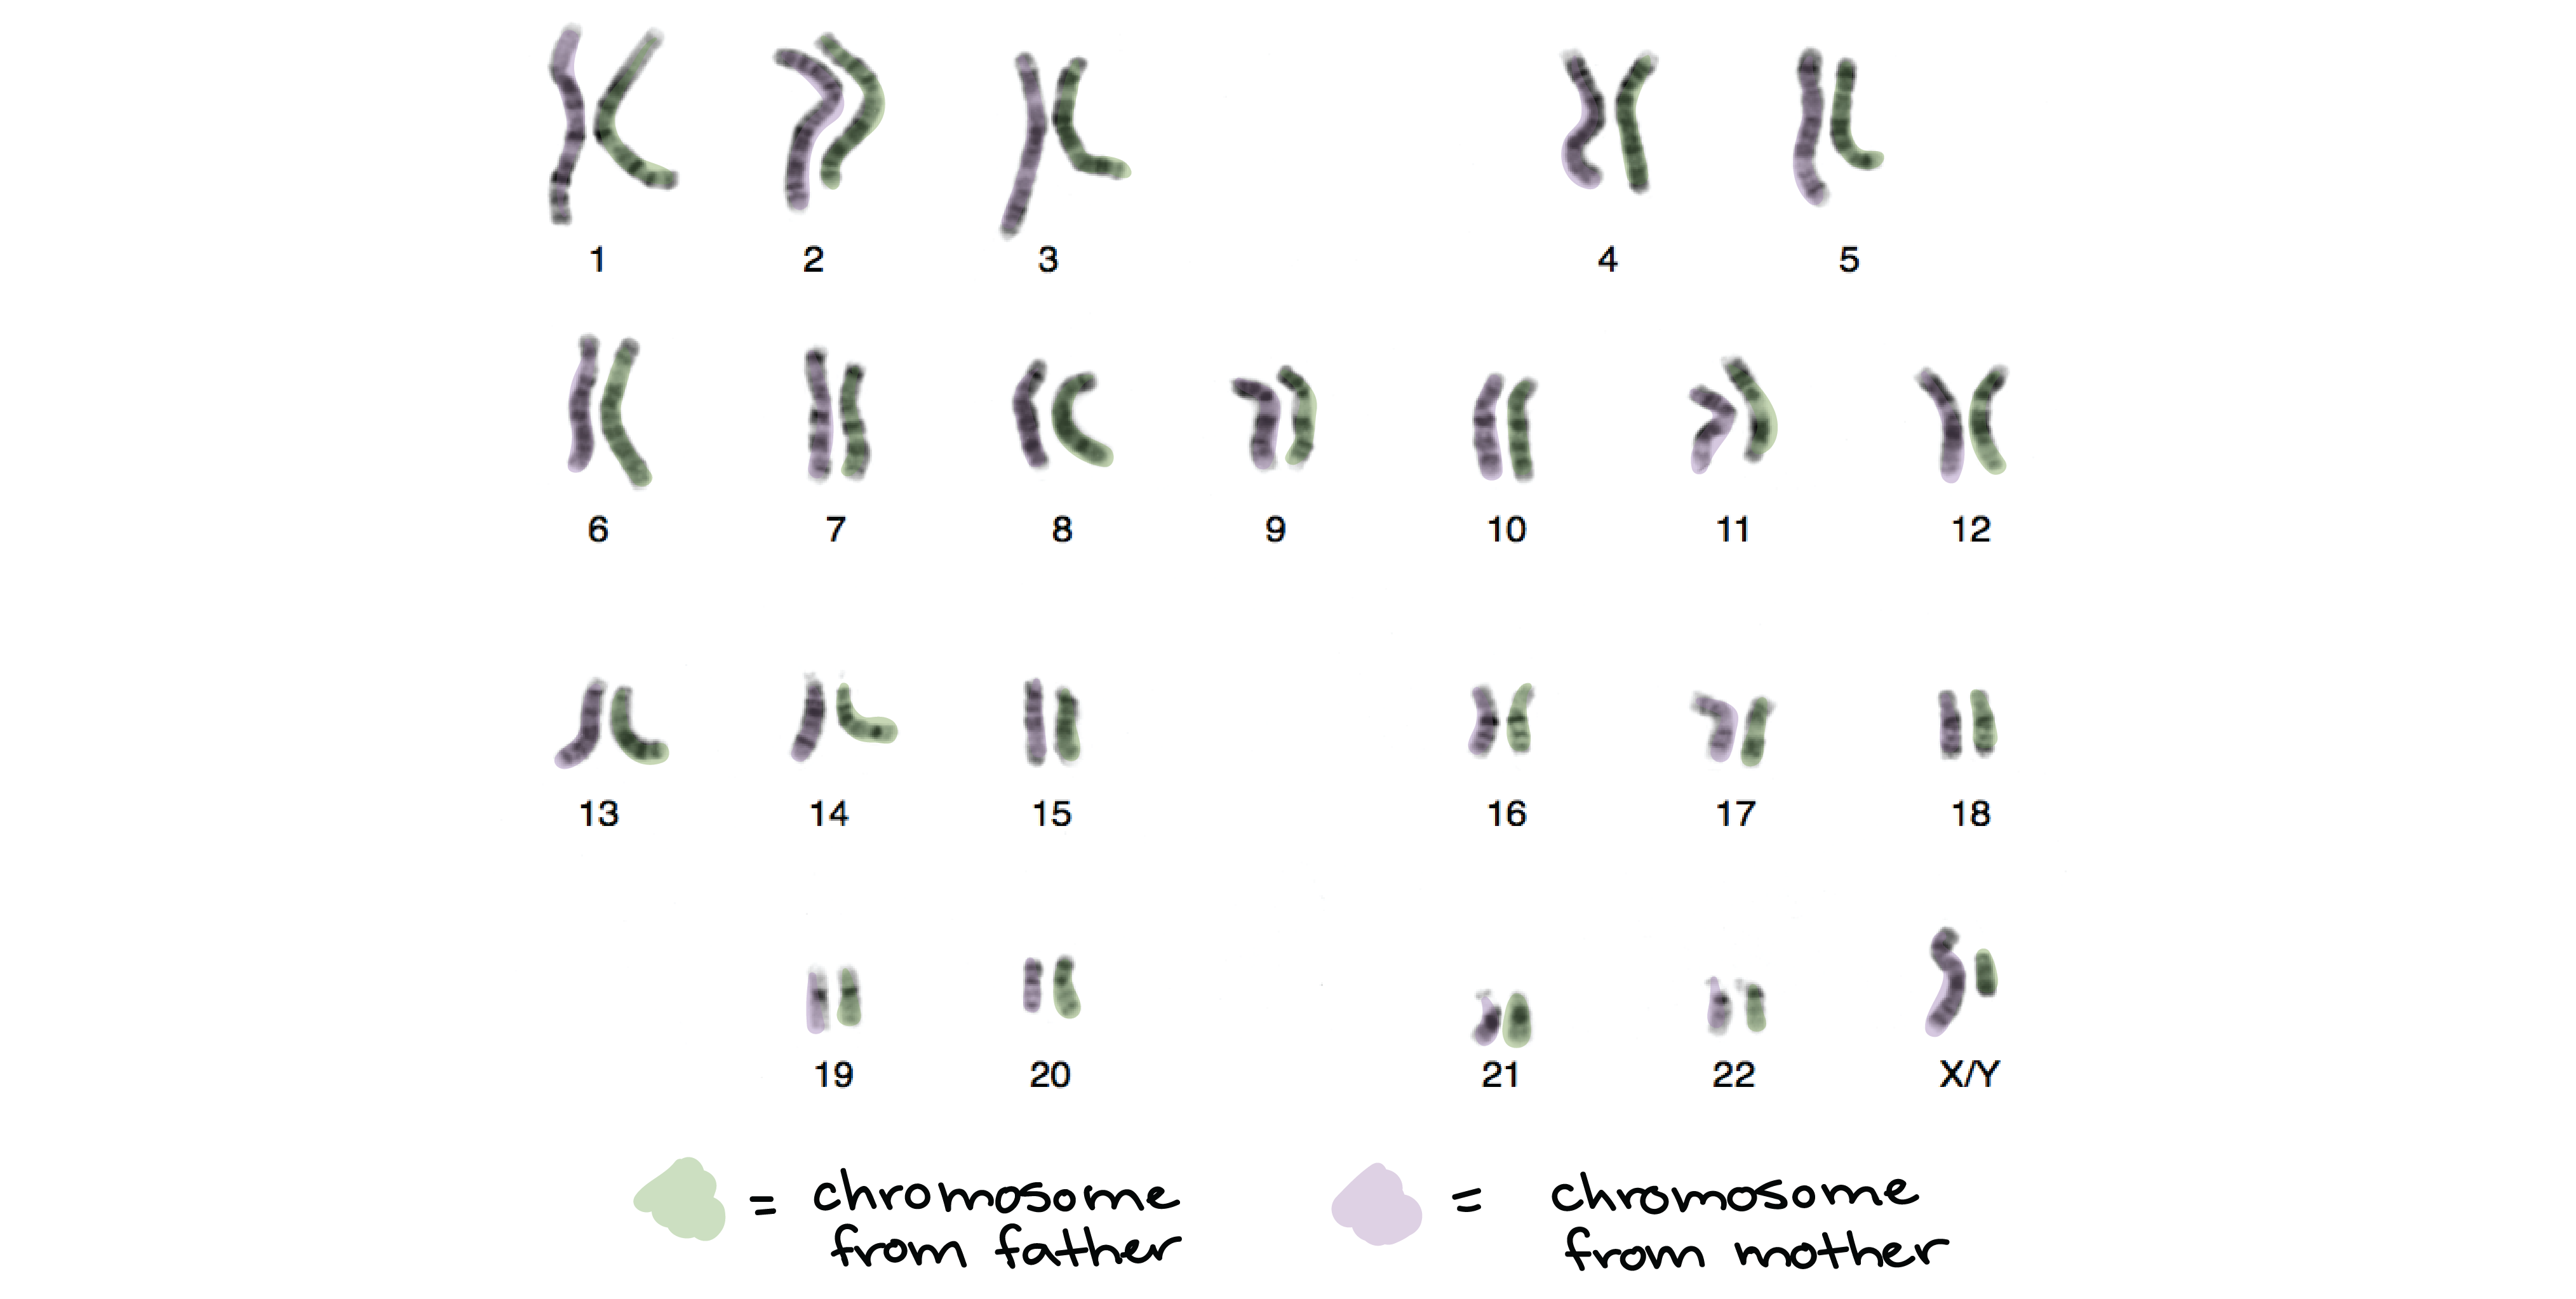 Chromosome structure and numbers review (article) | Khan Academy